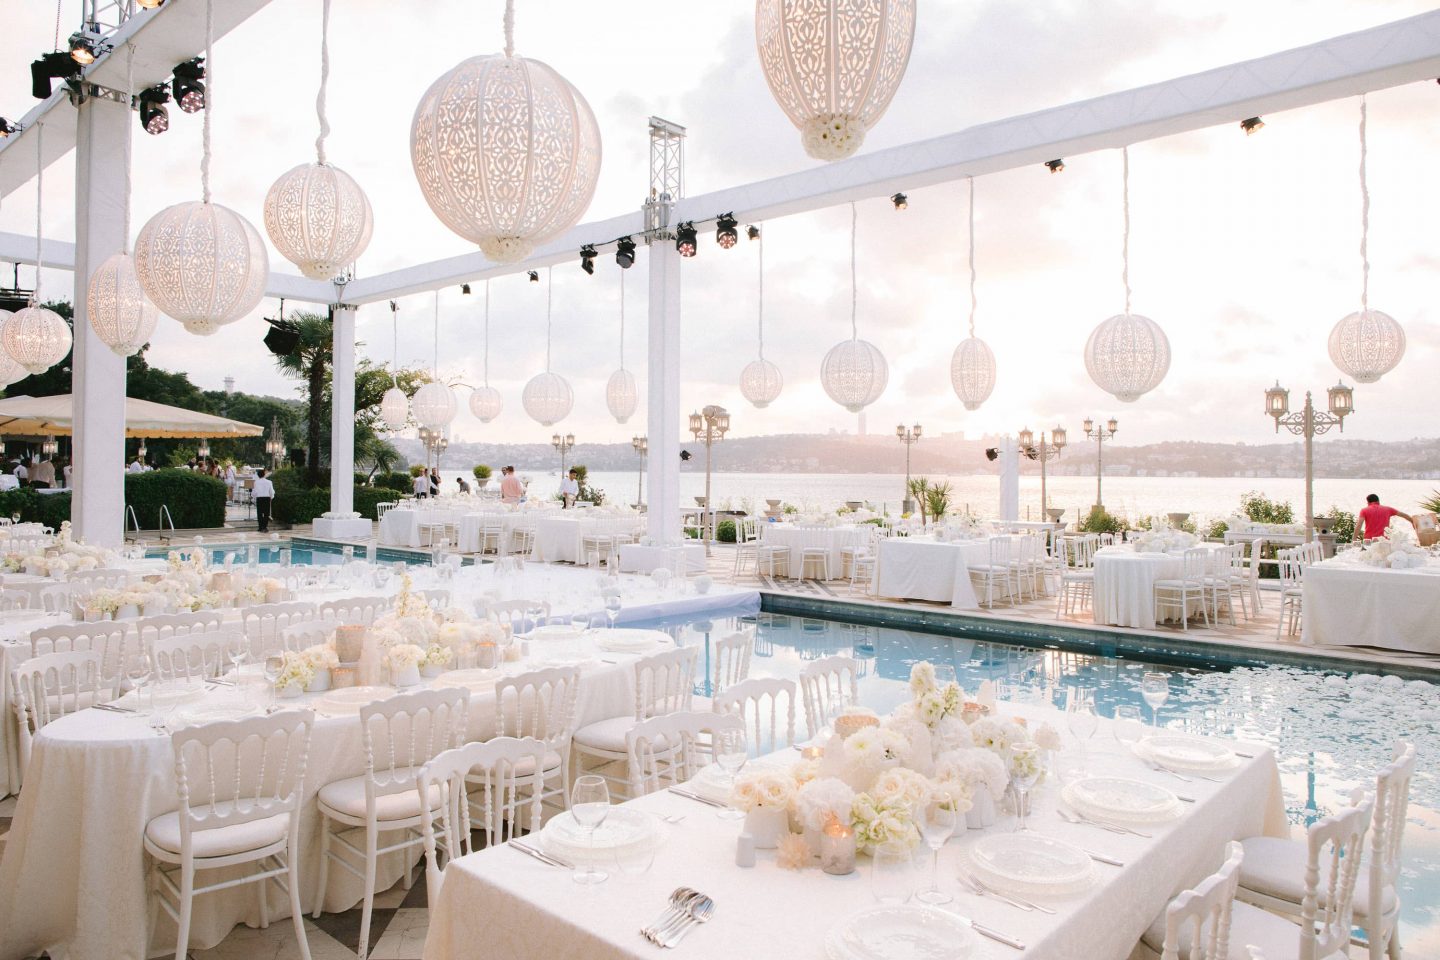 White party decor at this Istanbul wedding weekend at Four Seasons Bosphorus | Photo by Allan Zepeda